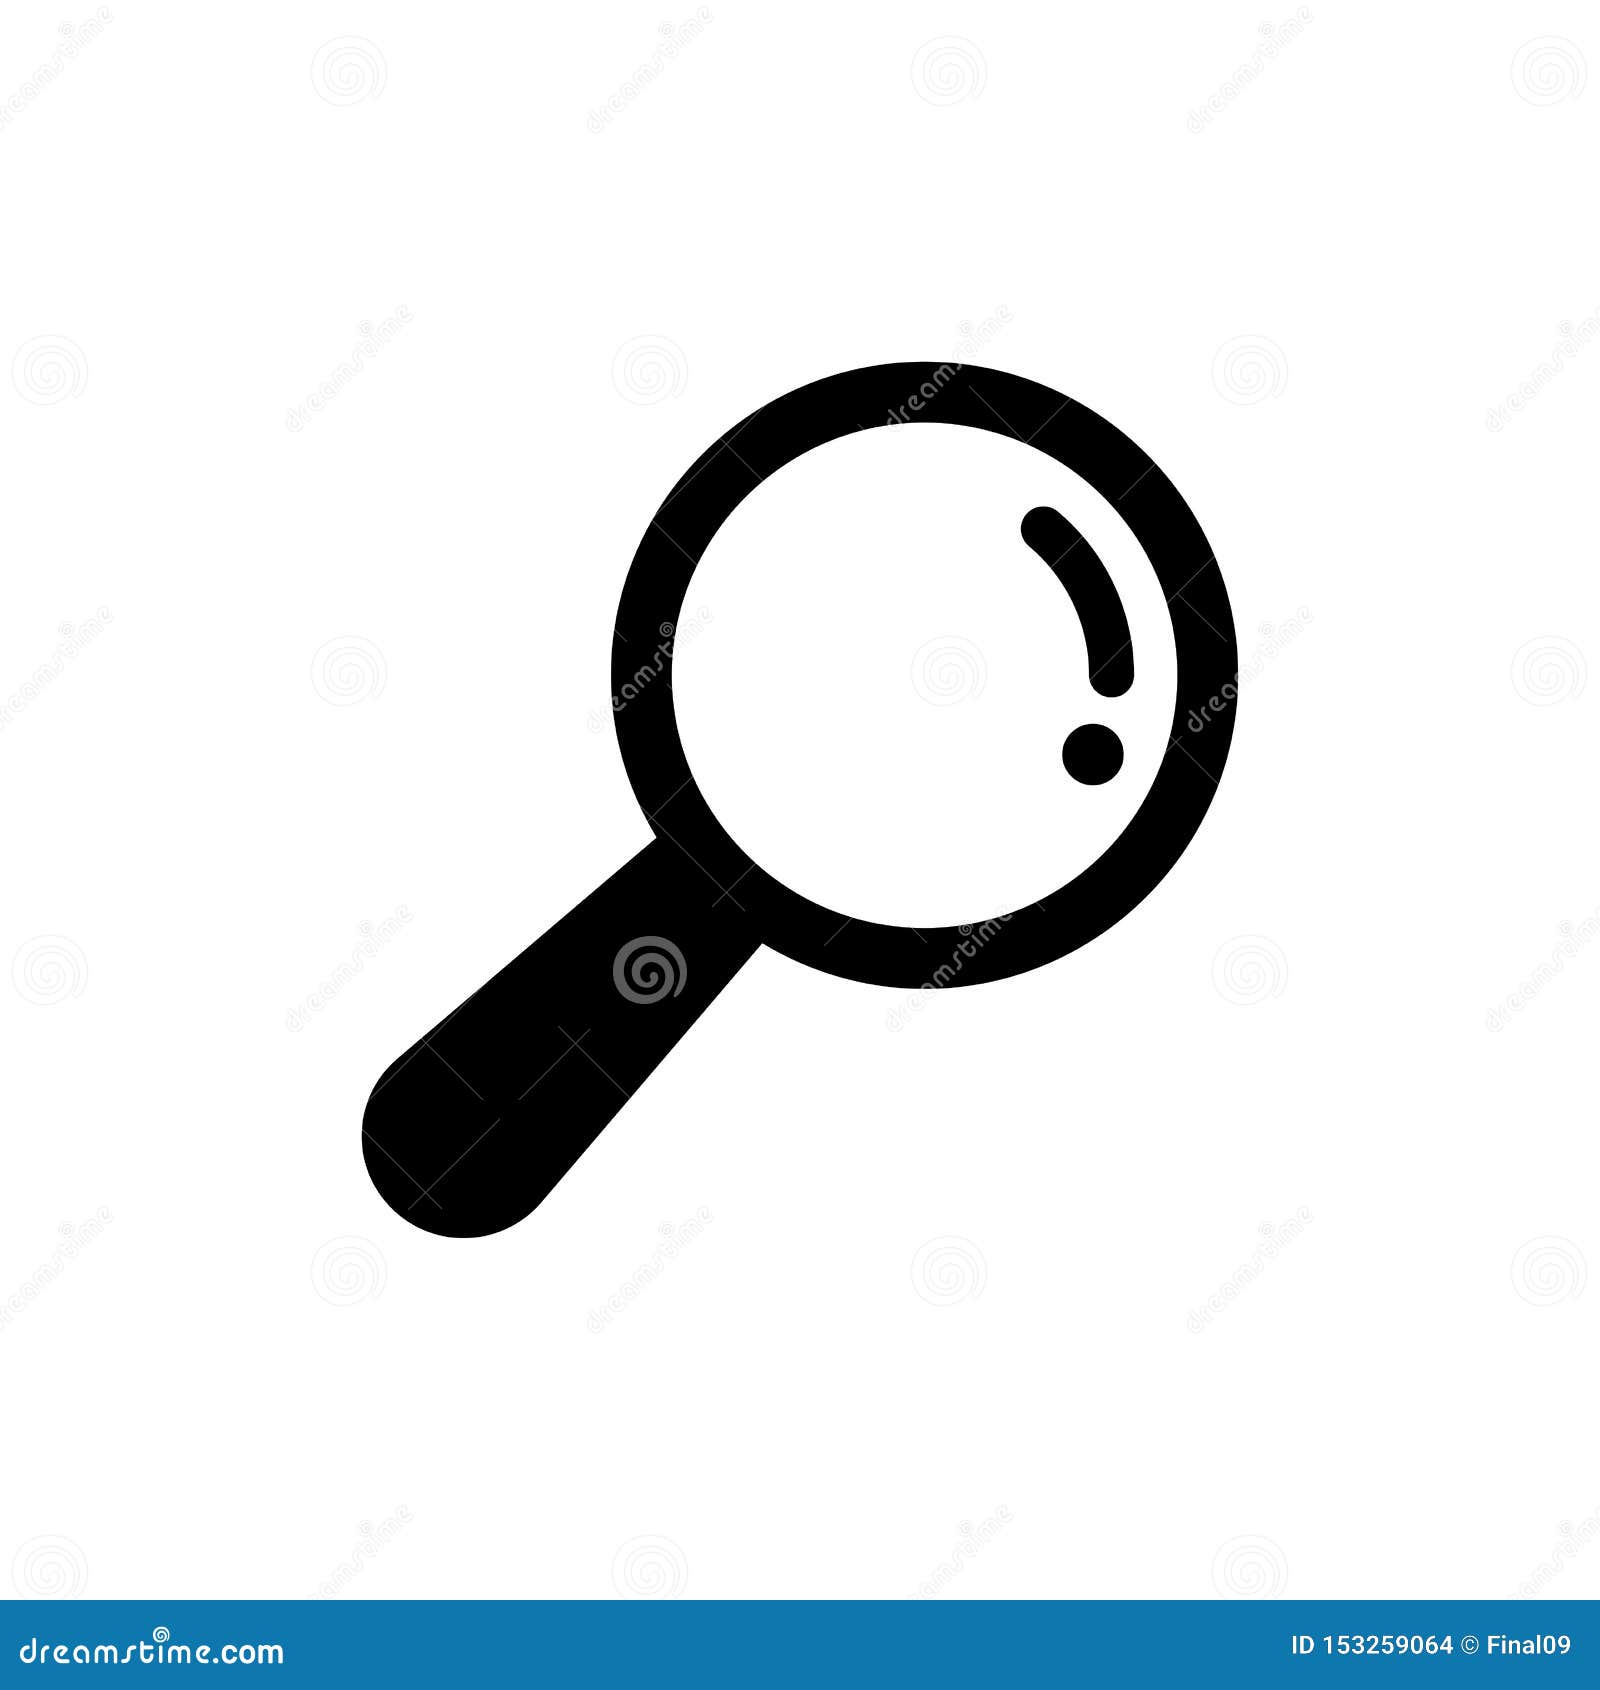 Magnifying Glass or Search Icon Stock Vector - Illustration of lens ...